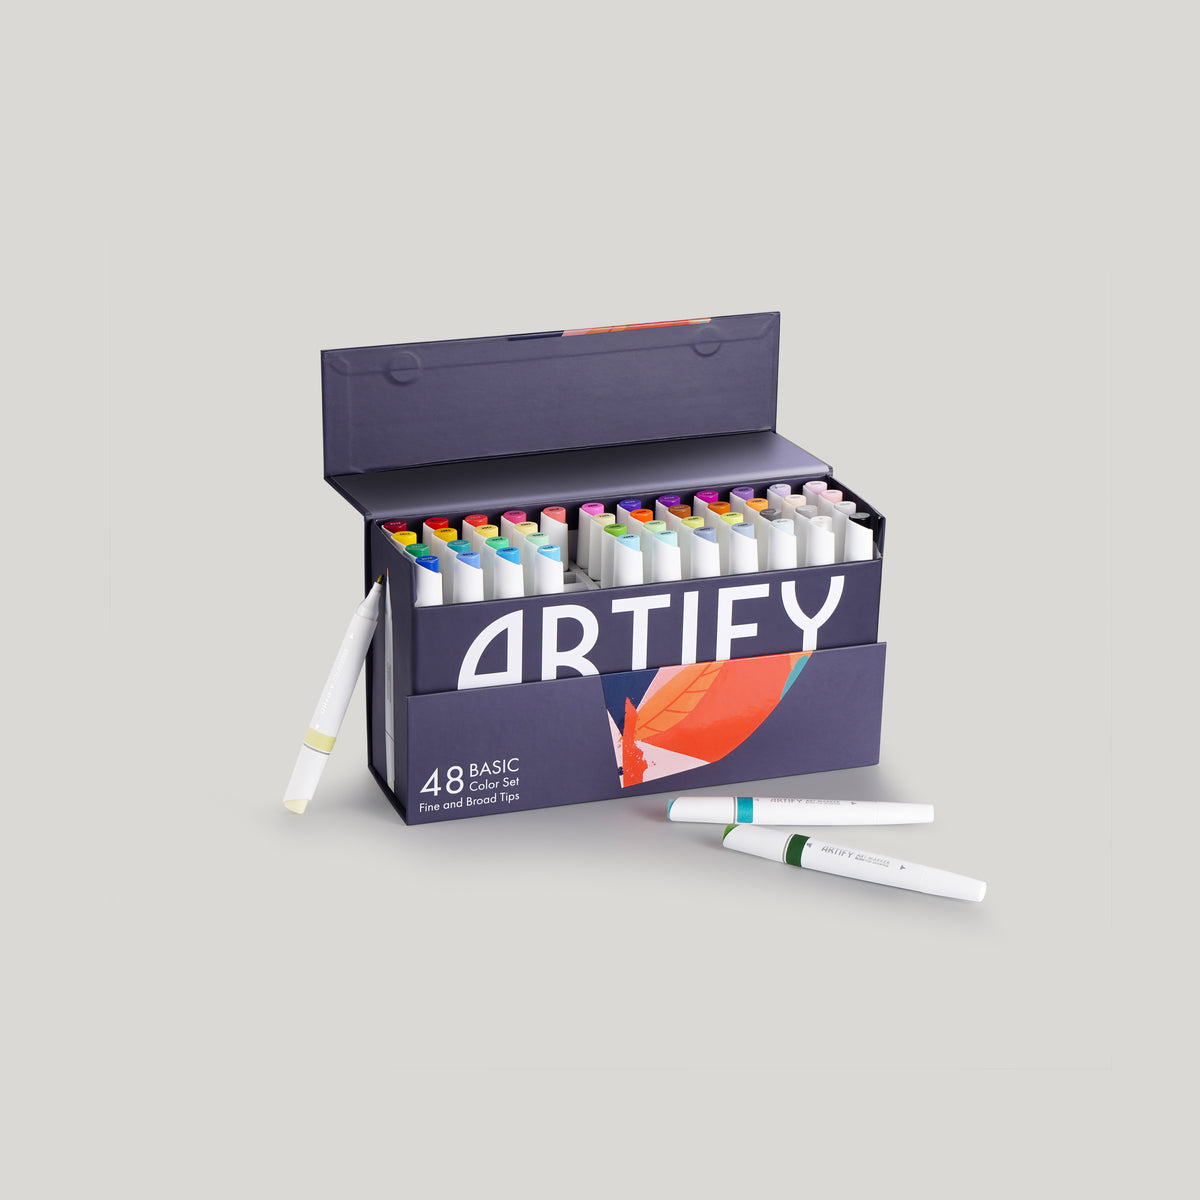 ARTIFY 48 Colors Alcohol Brush Markers, Brush & Chisel Dual Tips Professional Artist Markers, Drawing Marker Set with Carrying Case for Adult Coloring